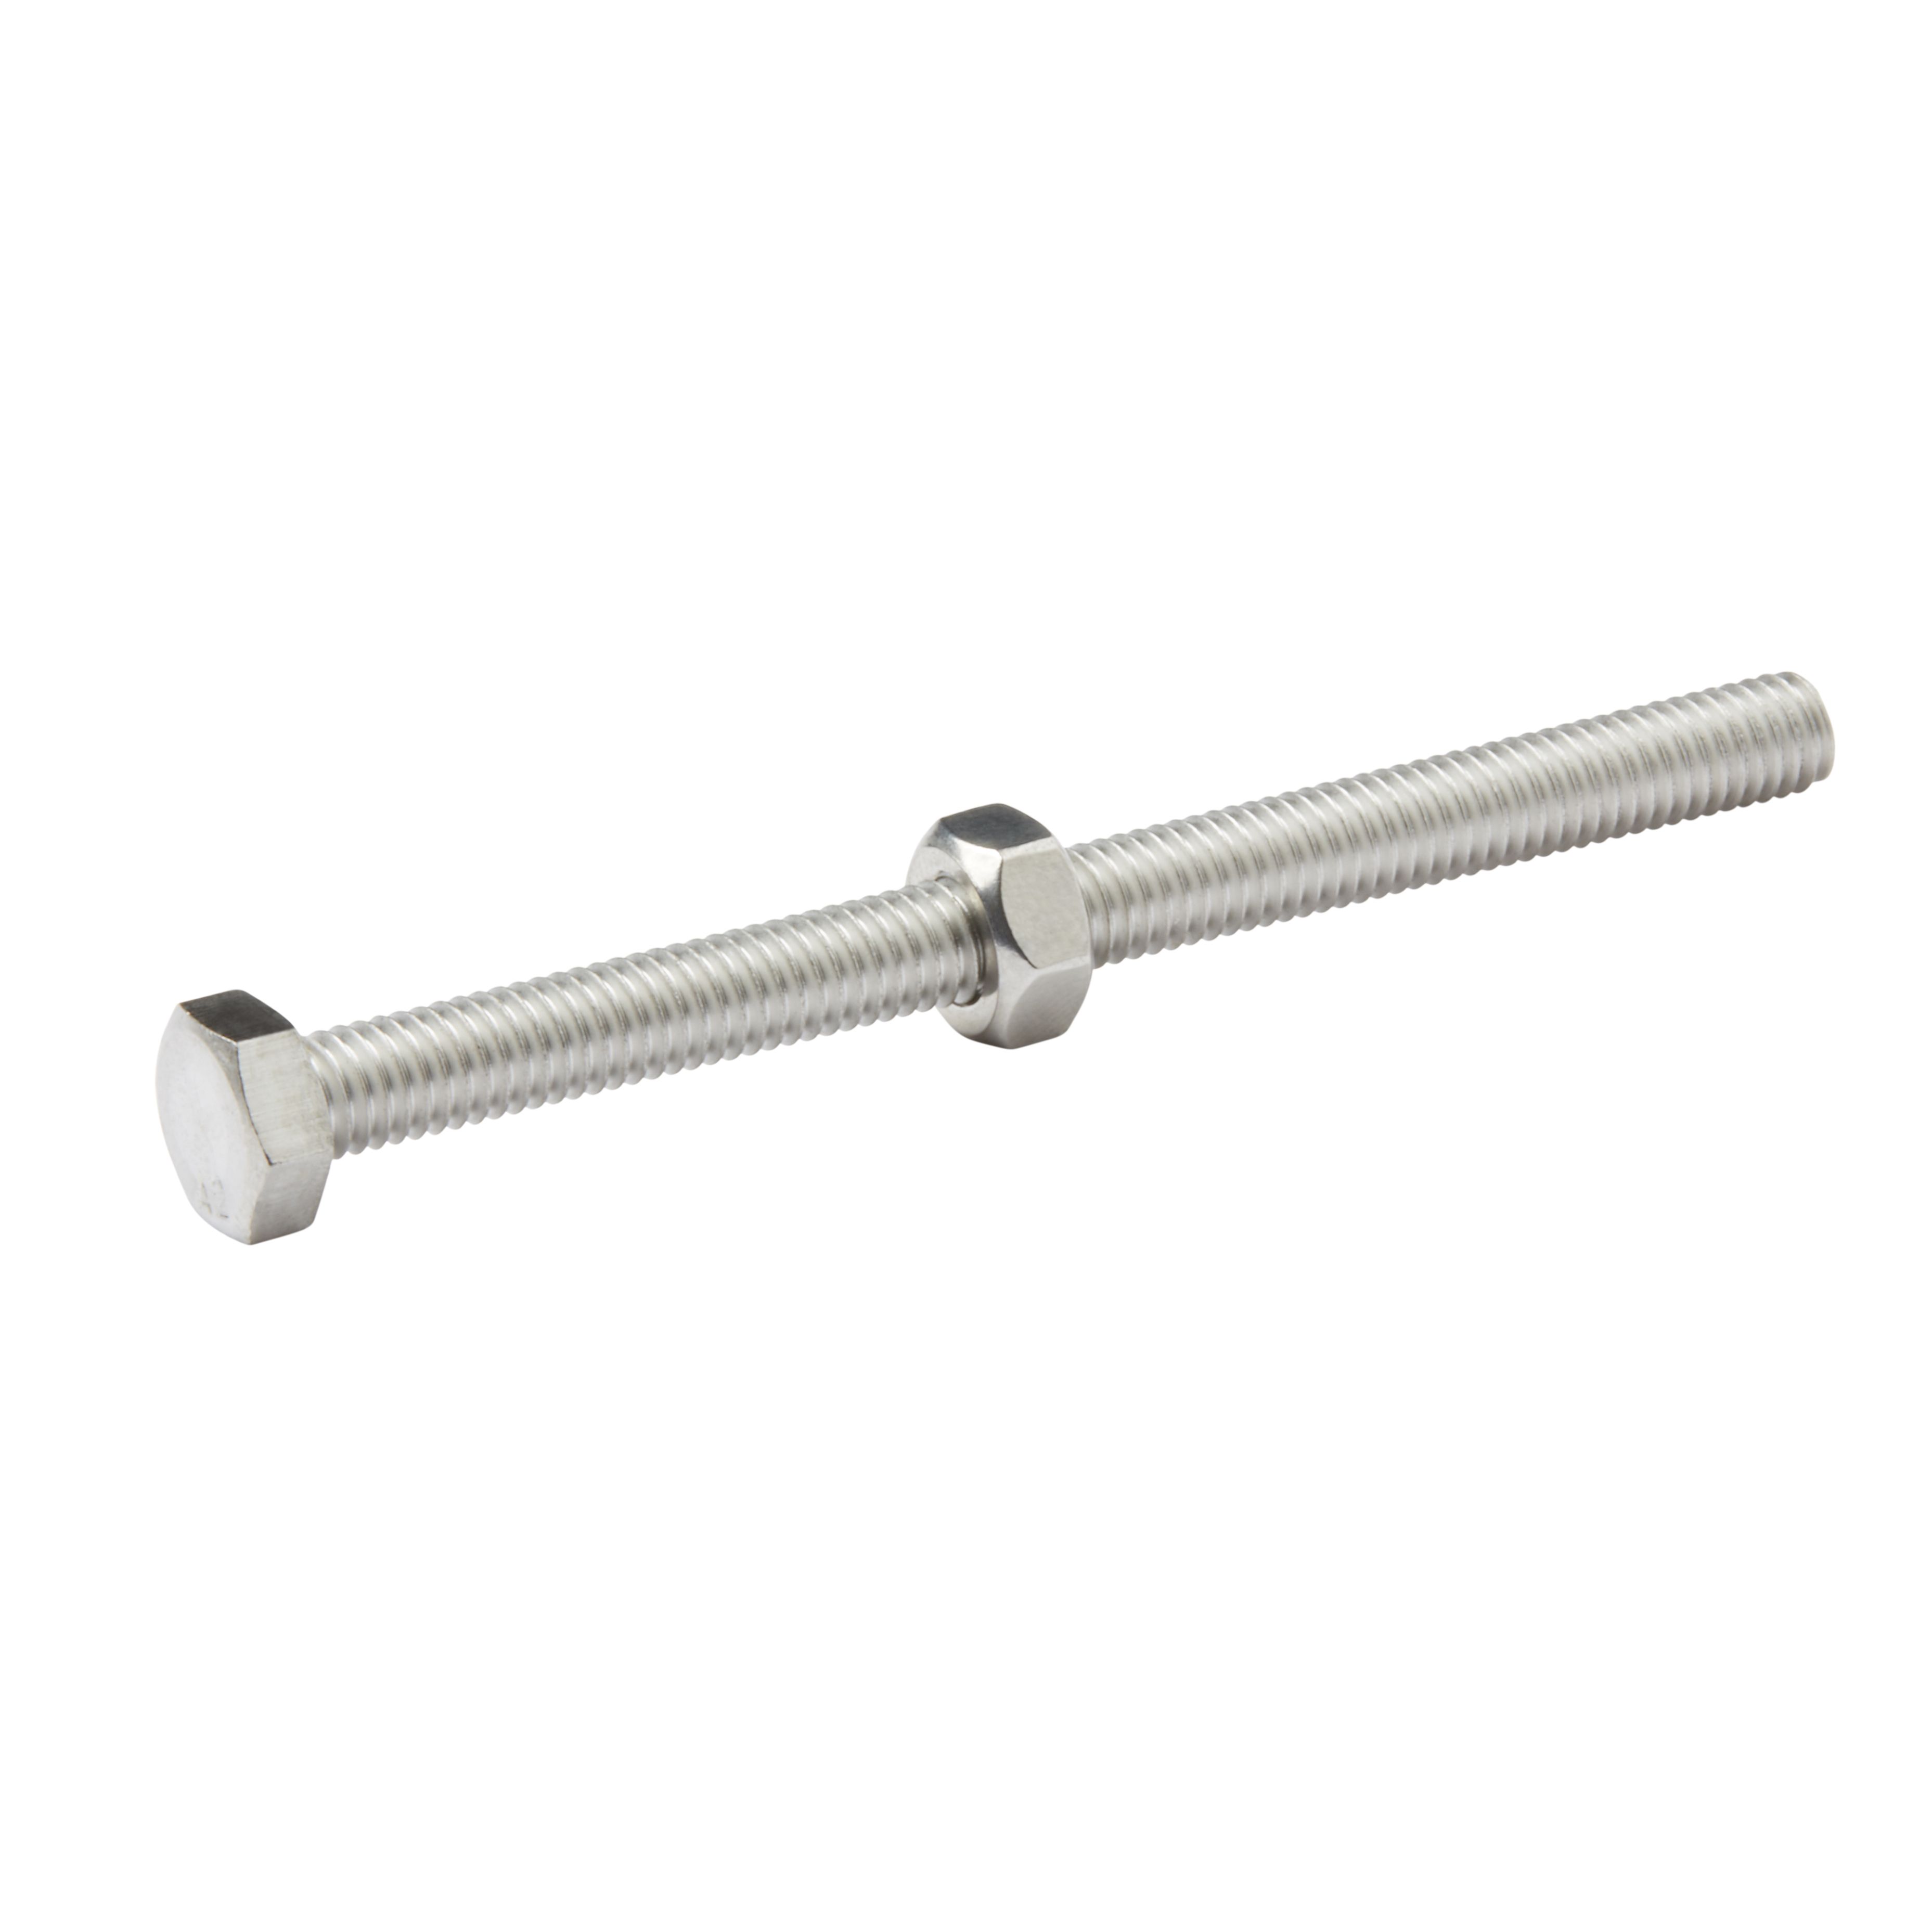 Diall M6 Hex Stainless steel Bolt & nut (L)80mm (Dia)6mm, Pack of 10